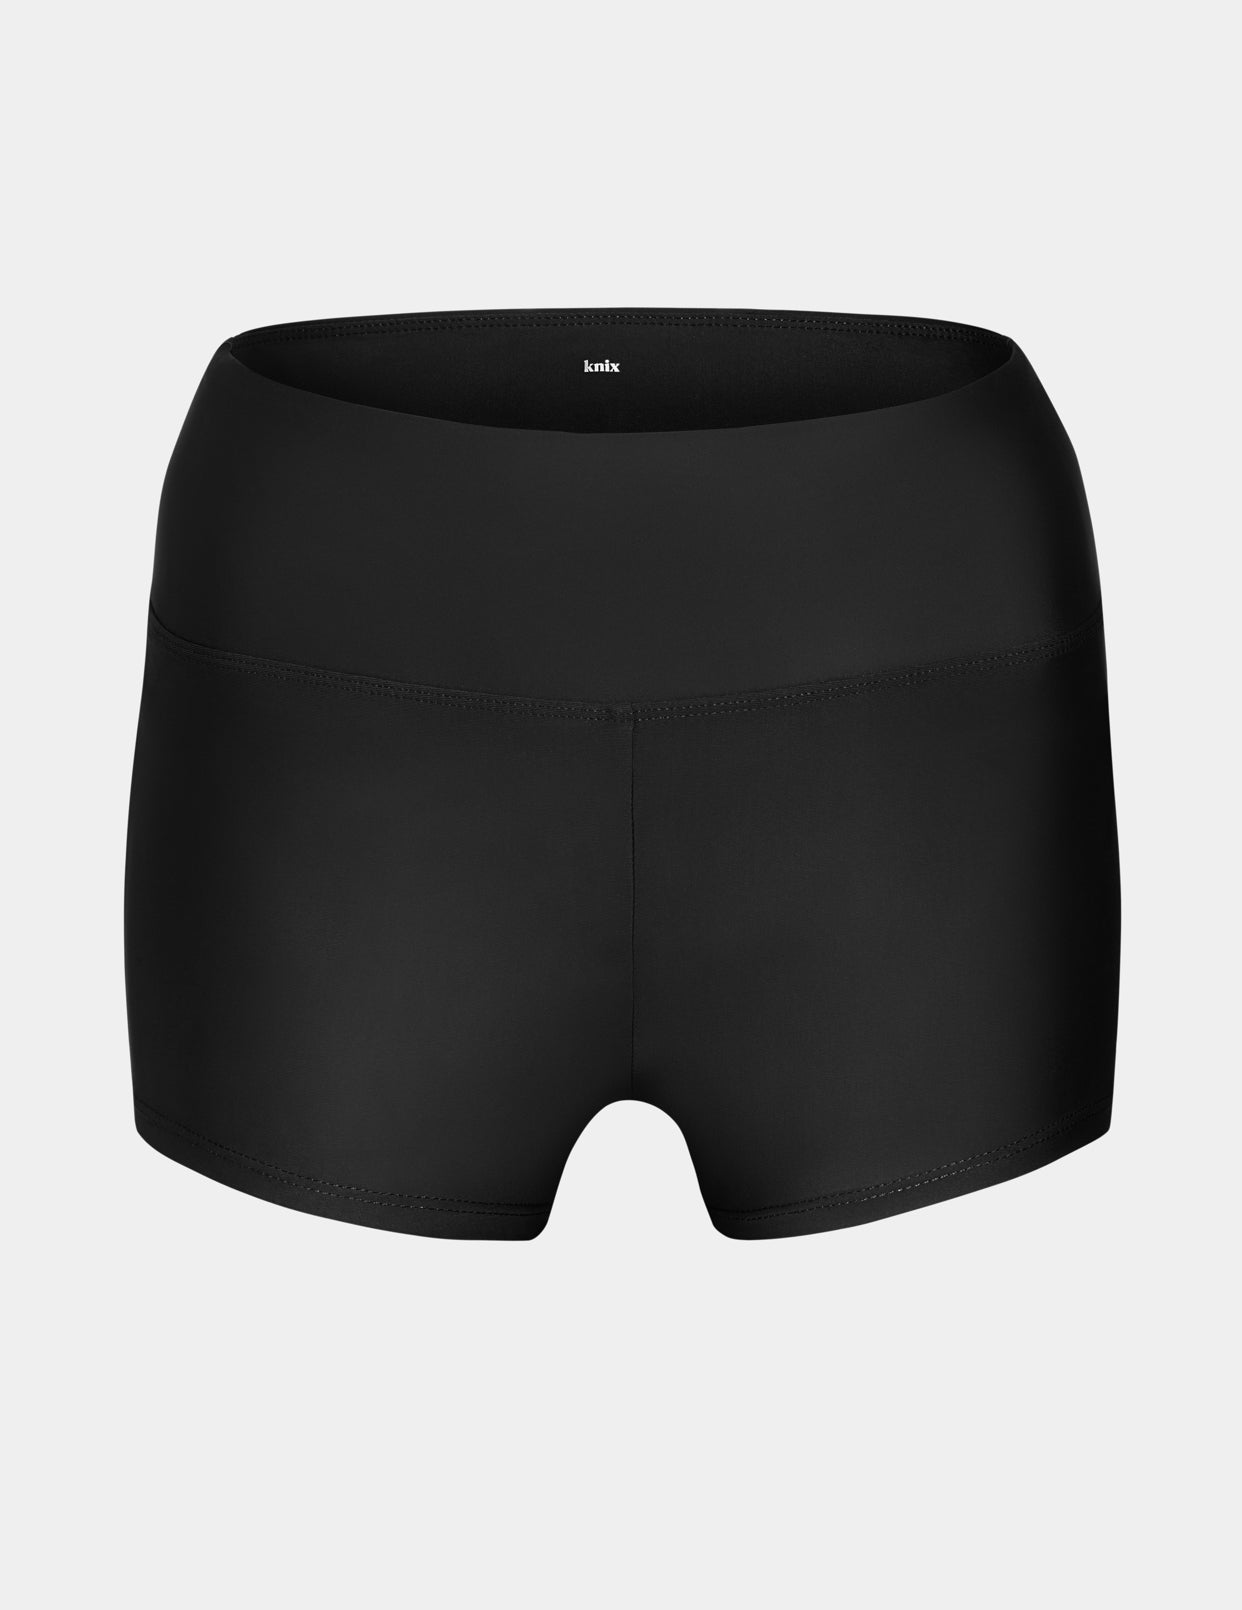 Knix, the Maker of Period-Proof Underwear, Just Launched a Swim Collection  (That Goes Up to Size 2XL) - Yahoo Sports